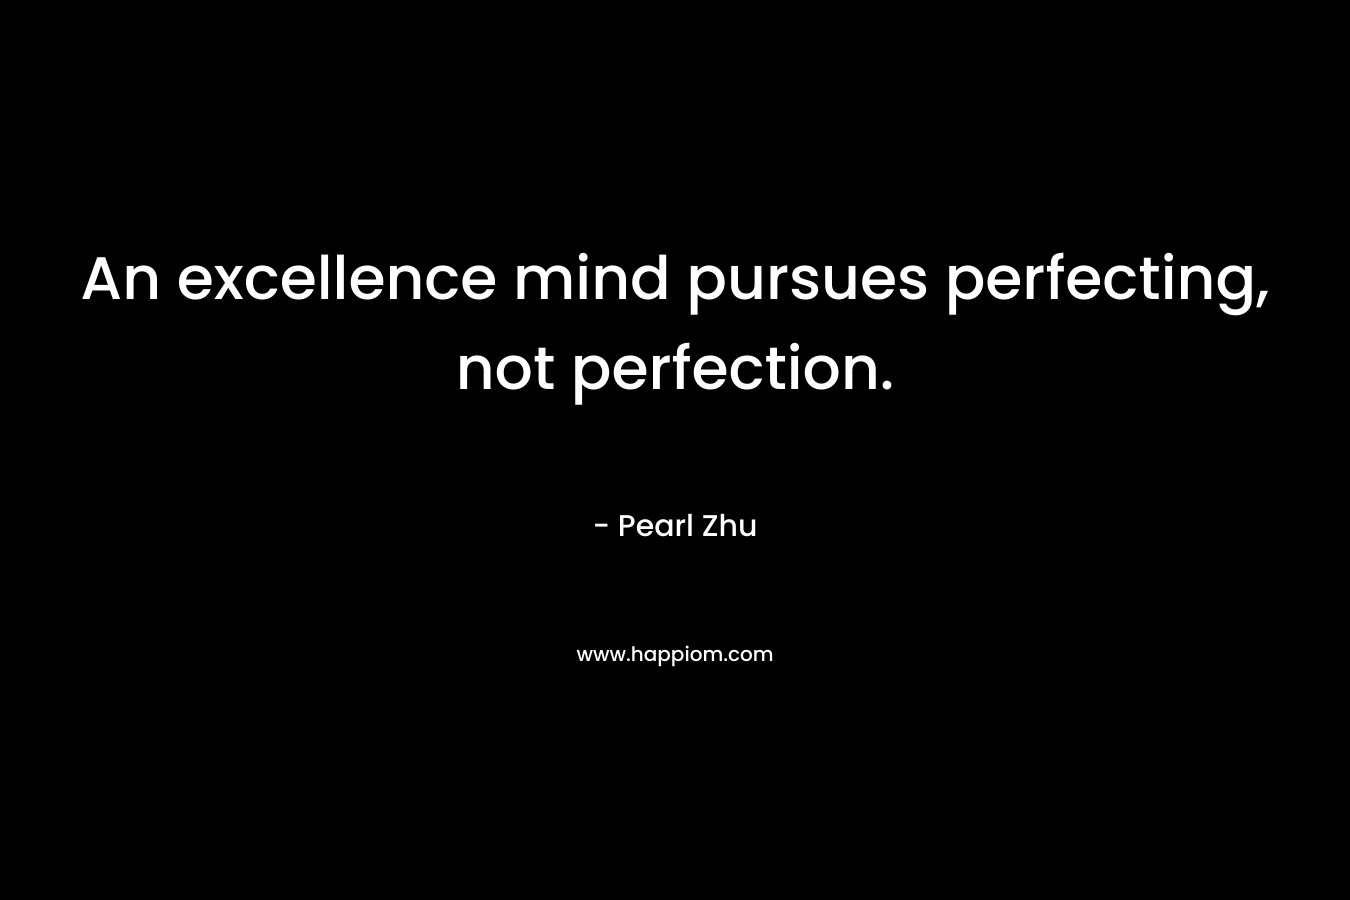 An excellence mind pursues perfecting, not perfection.